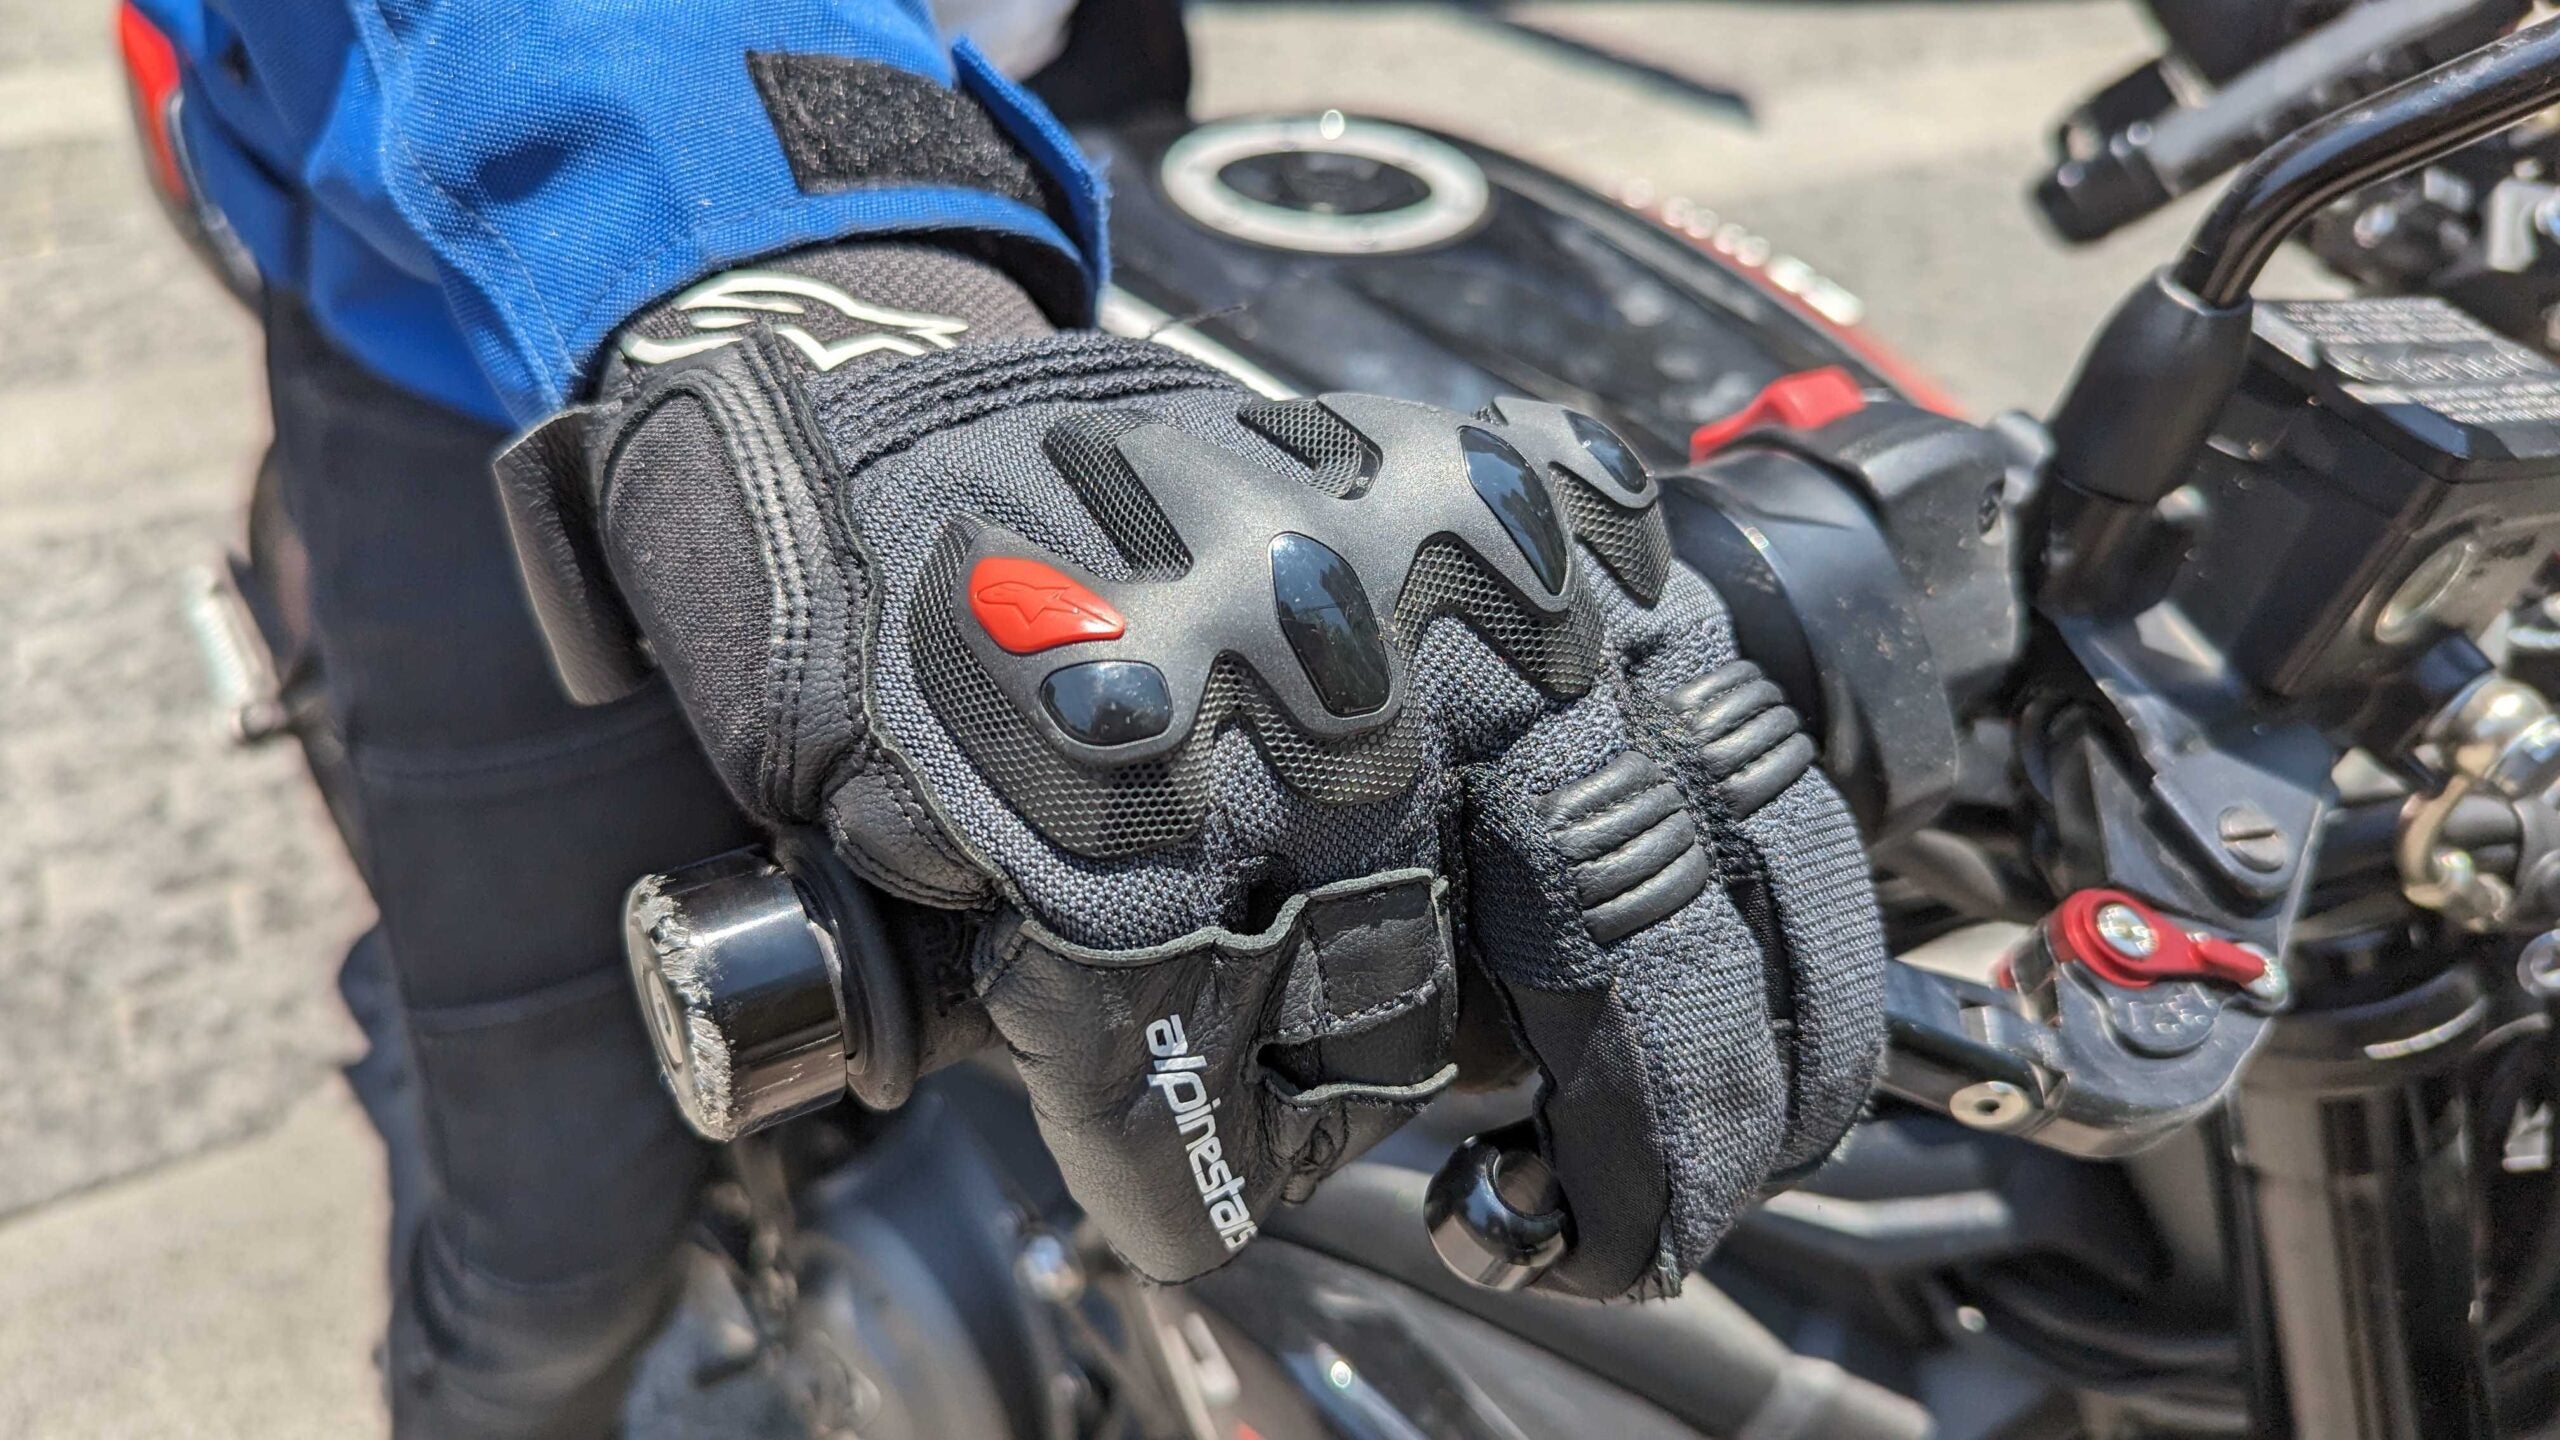 Gloves for motocycle